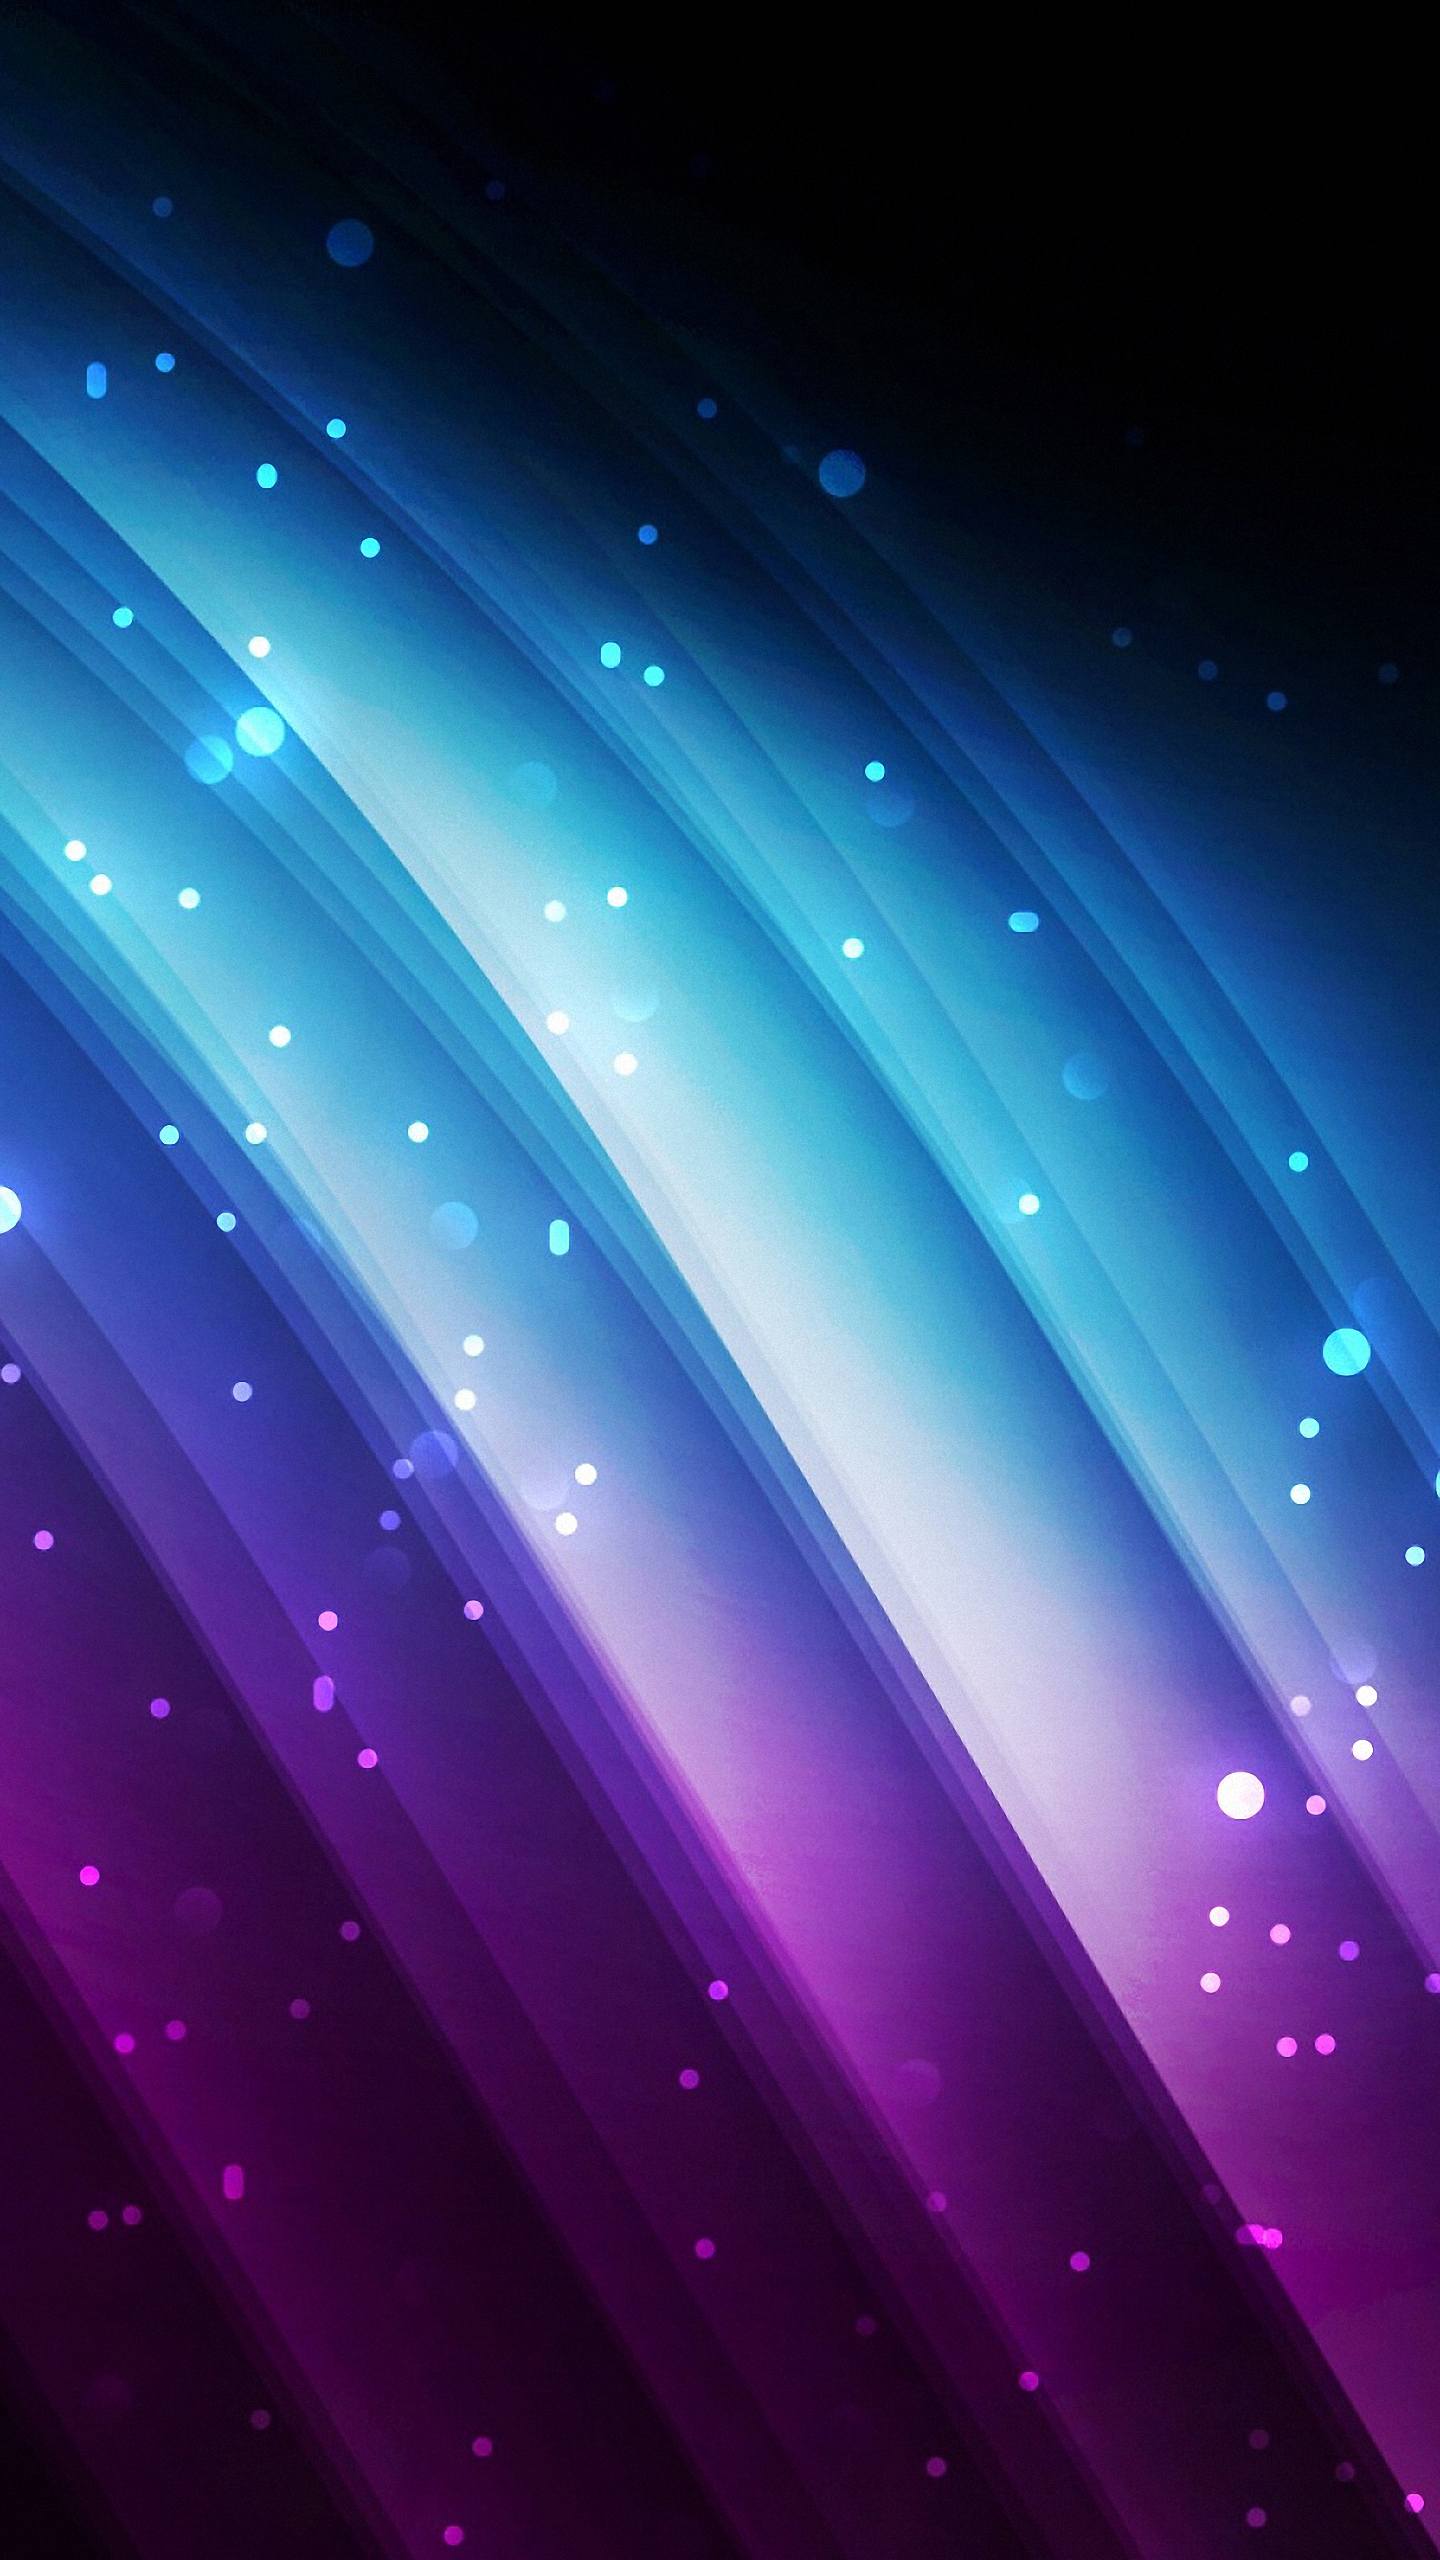 iphone wallpapers hd free download,blue,violet,sky,purple,light